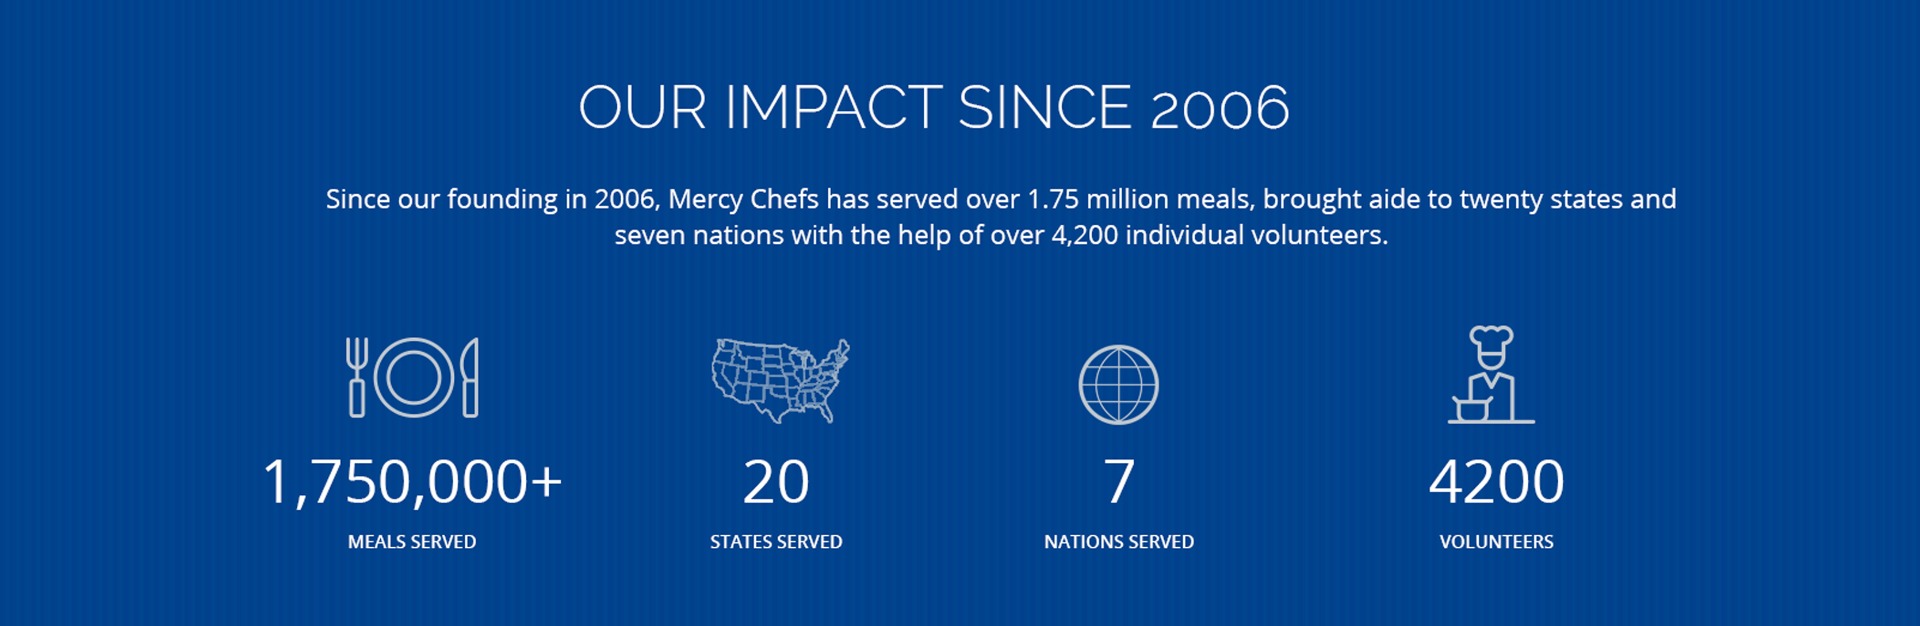 Our impact since 2006; 1,750,000+ meals served, 20 stated served, 7 nations served, 4200 volunteers